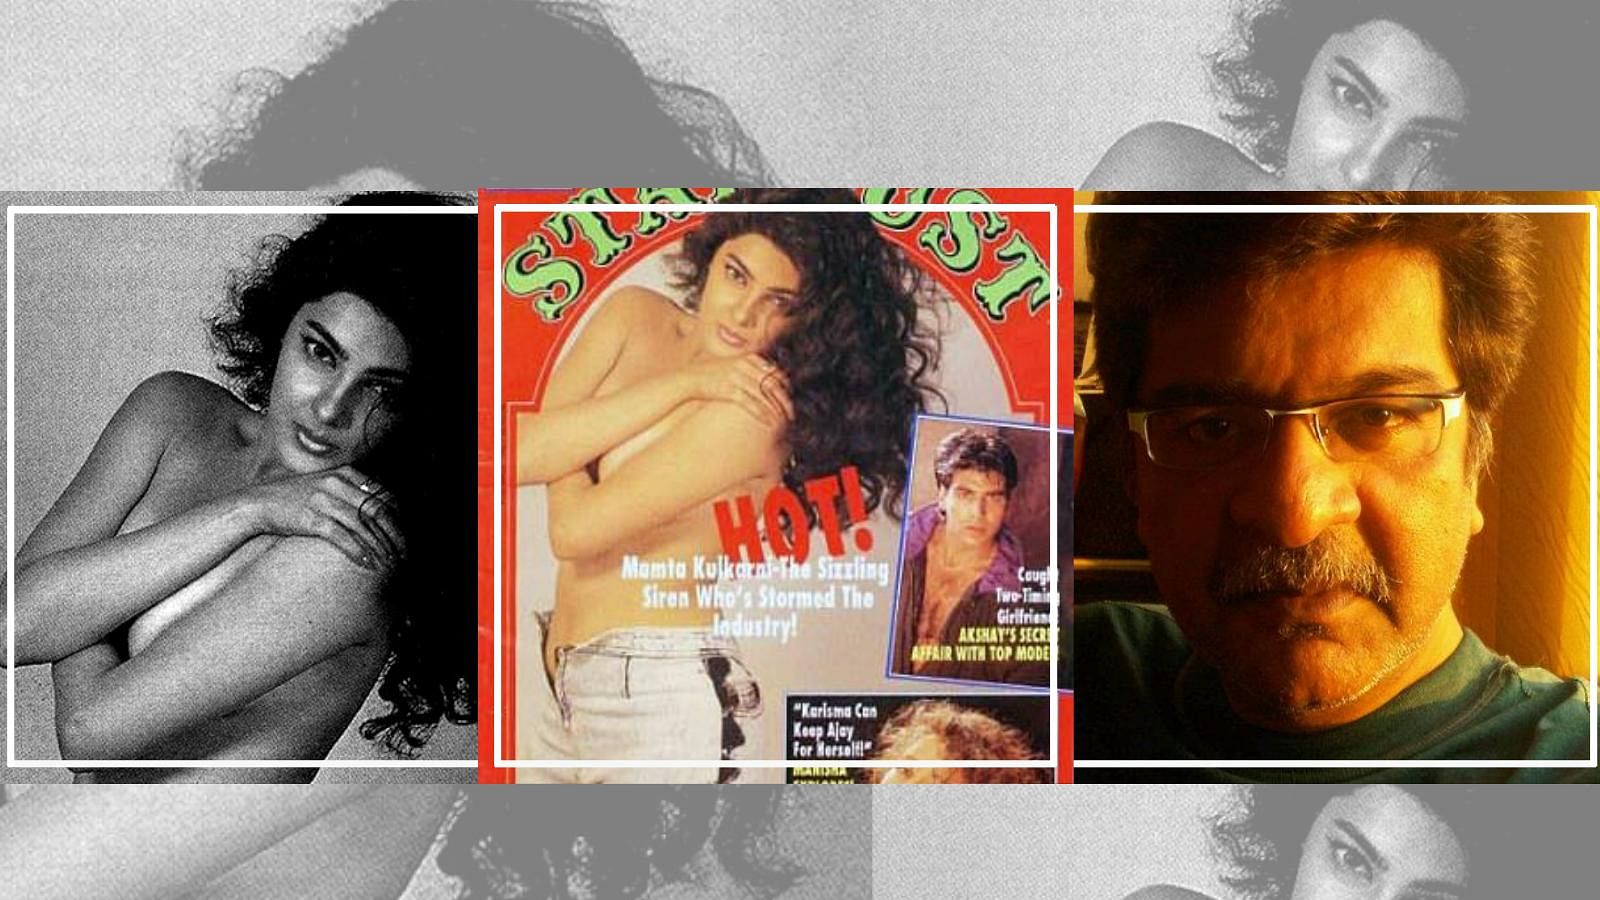 Mamta Kulkarni’s Bollywood career was launched thanks to this controversial <i>Stardust</i> cover, shot by Jayesh Sheth